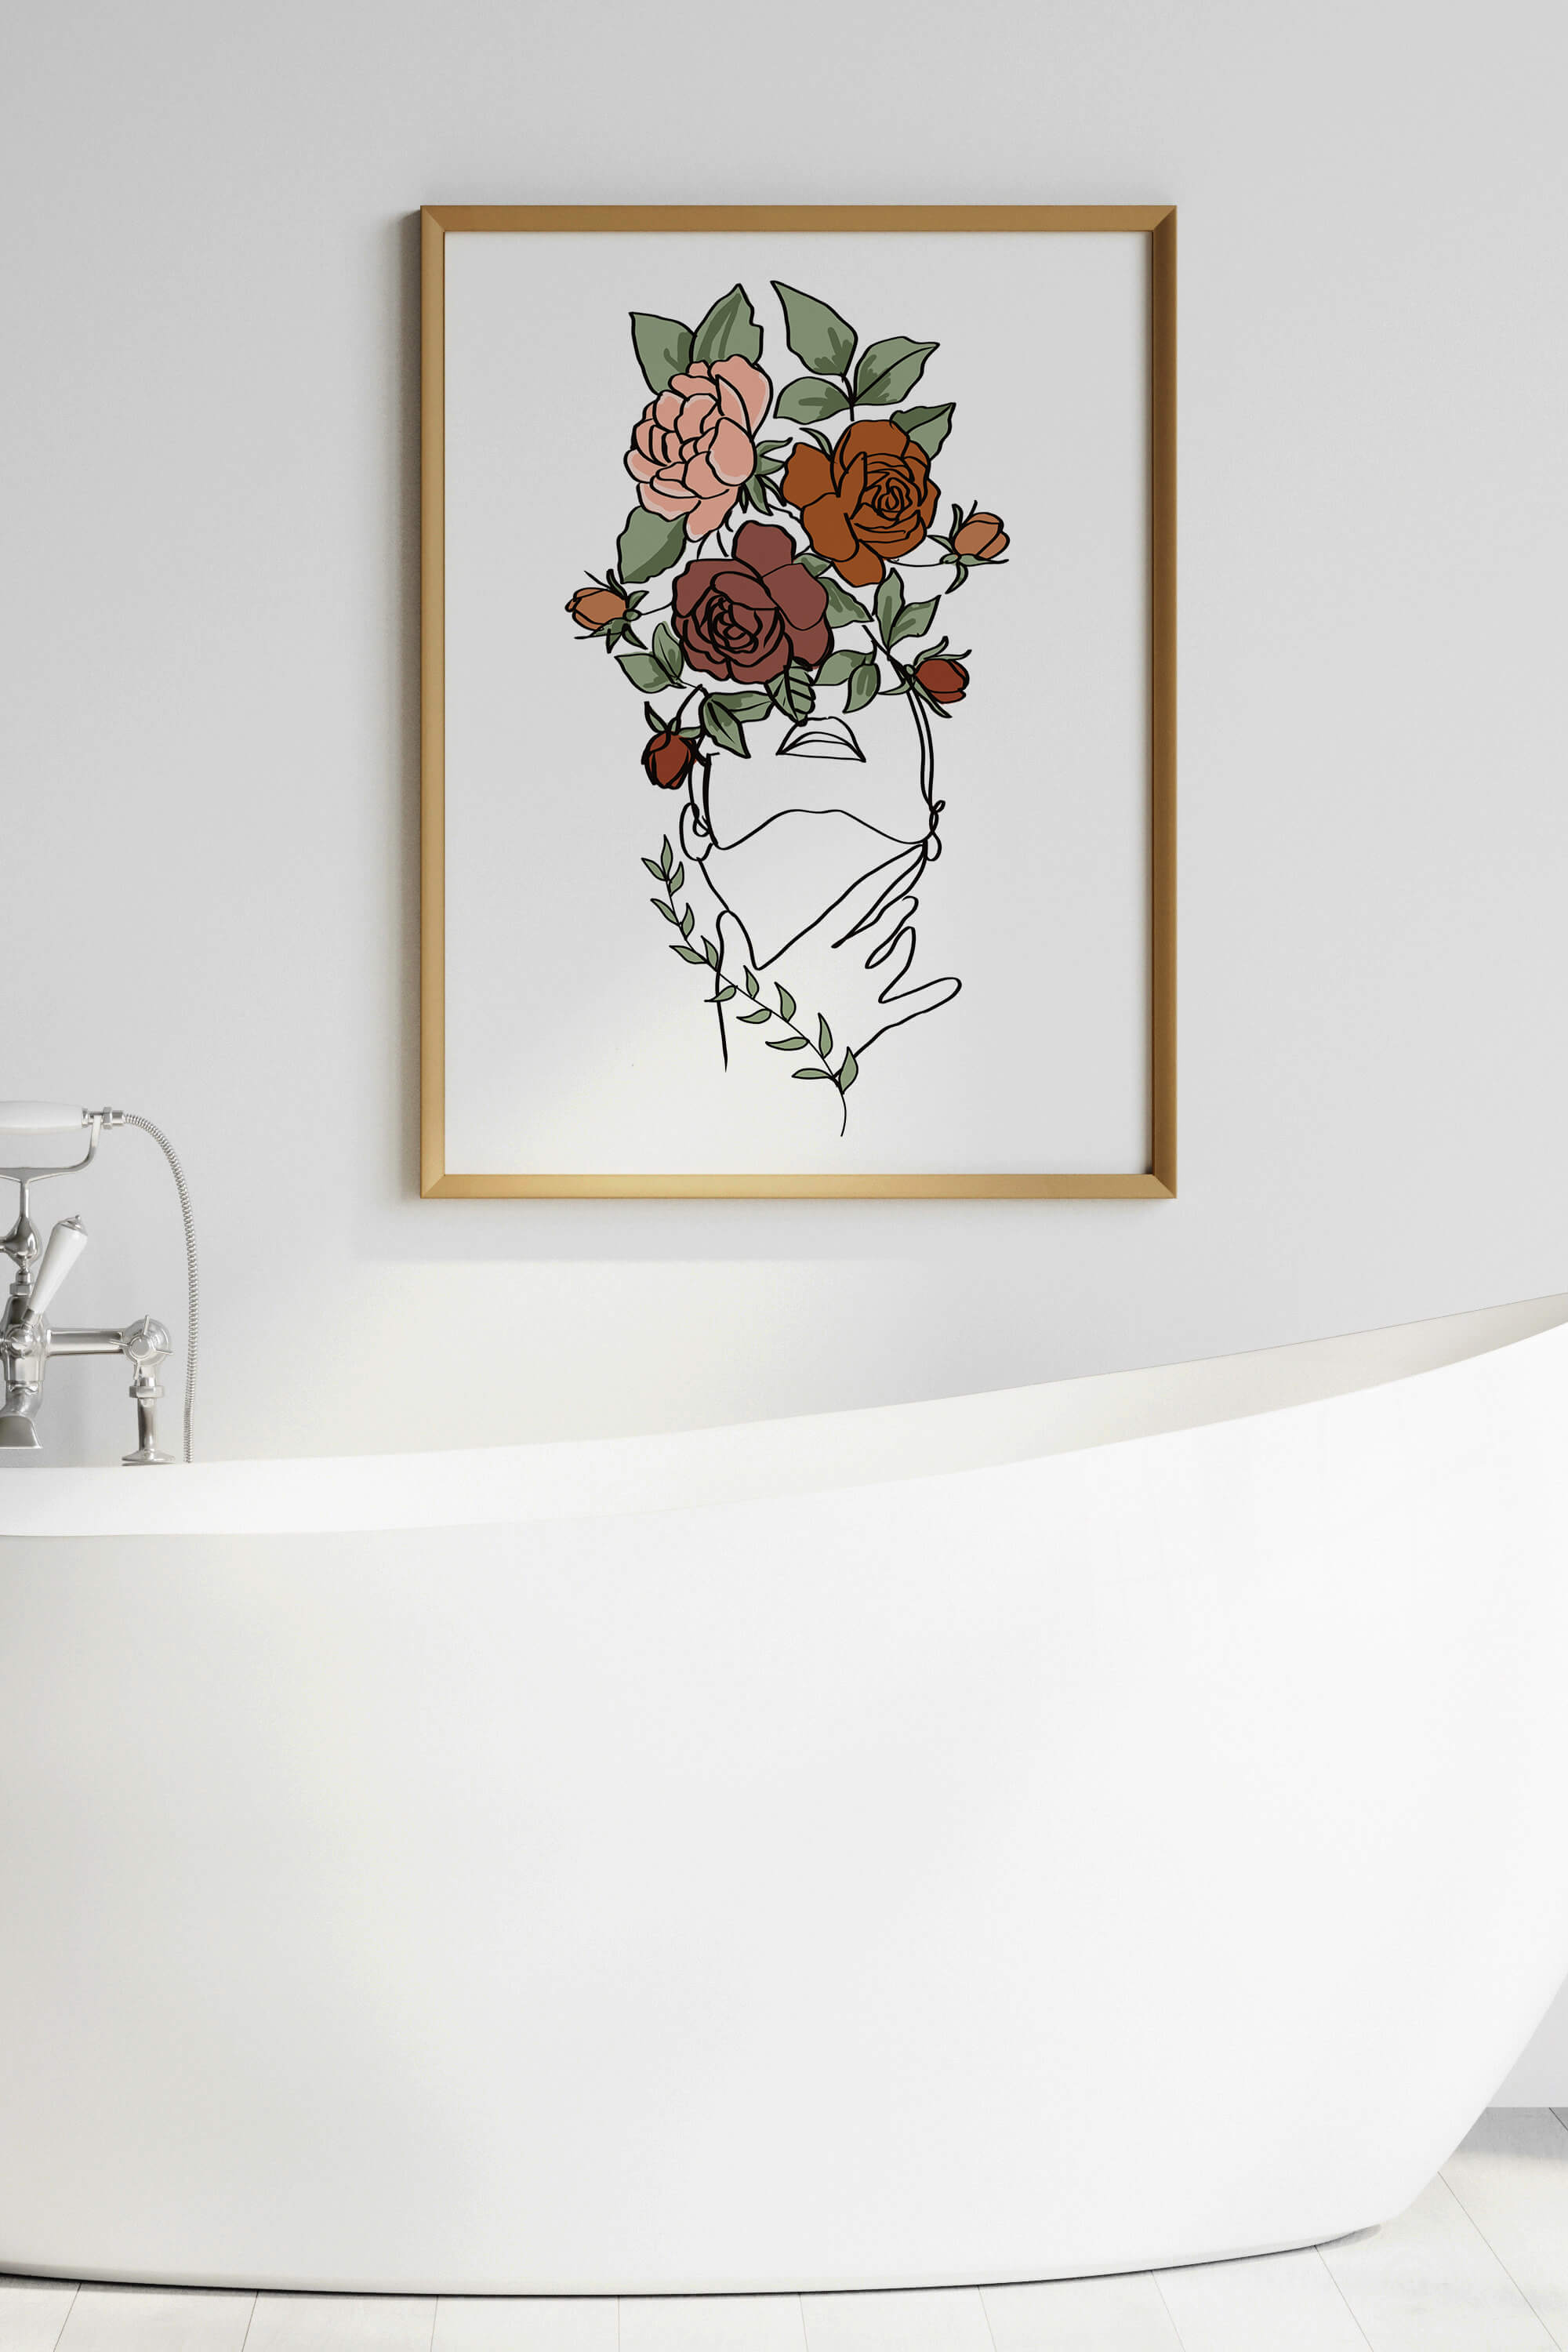 Versatile and artistic floral line art poster reflecting the beauty of feminine strength and nature's allure.